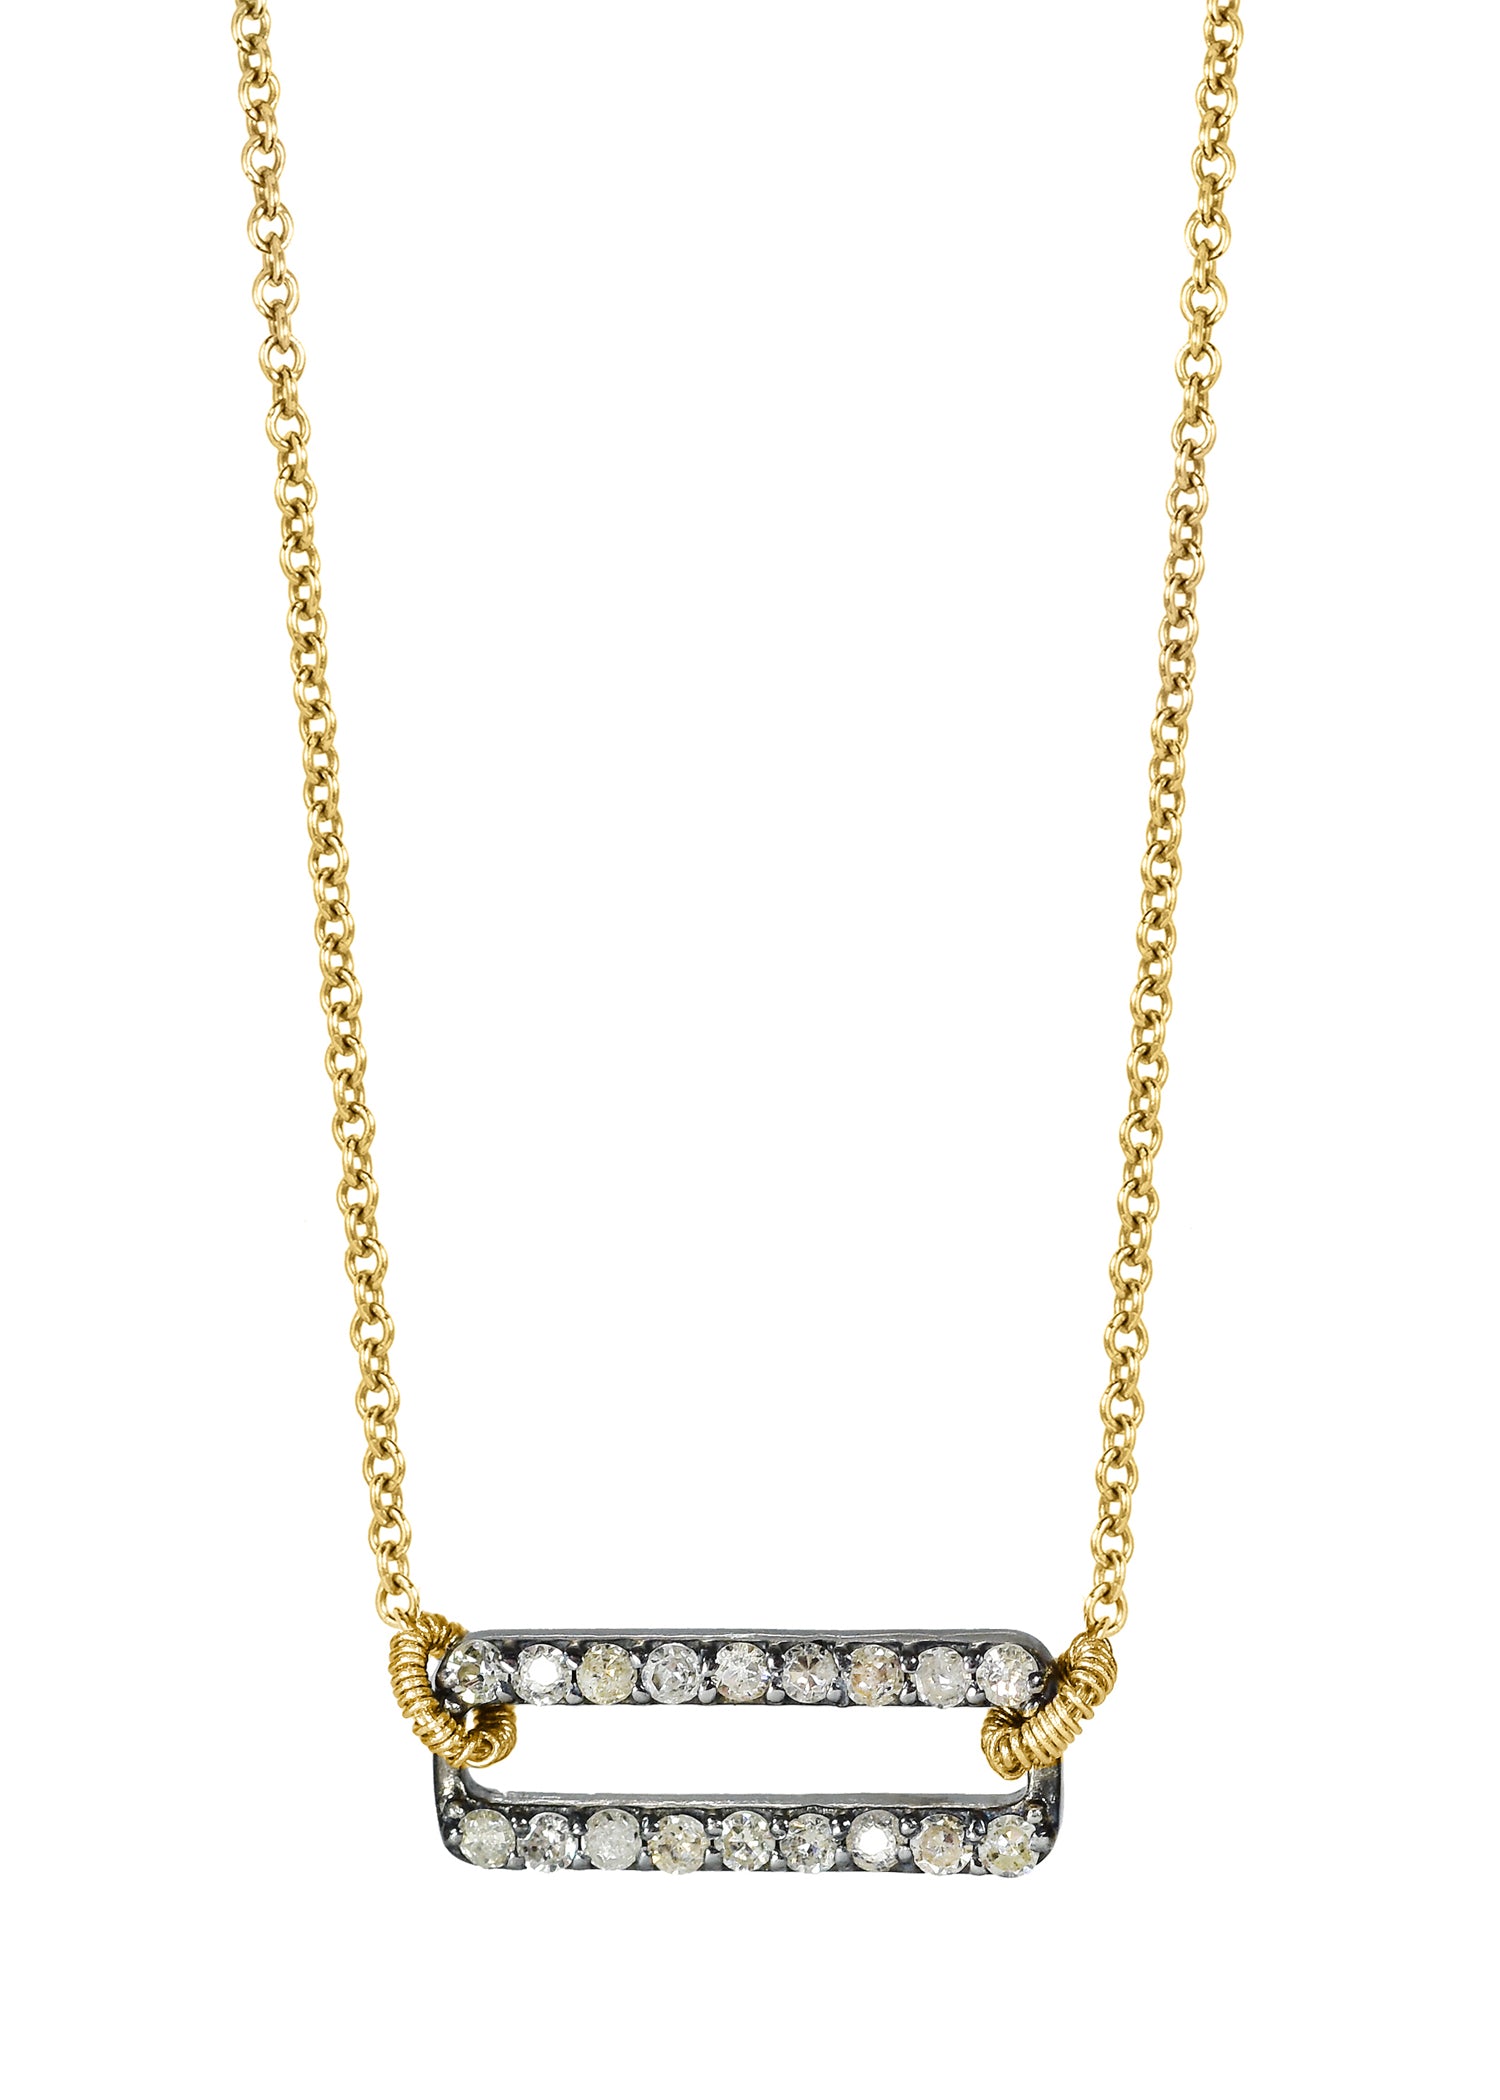 Diamond 14k gold Sterling silver Mixed metal Special order only Necklace measures 16" in length Pendant measures 1/4" in length and 5/8" in width Handmade in our Los Angeles studio